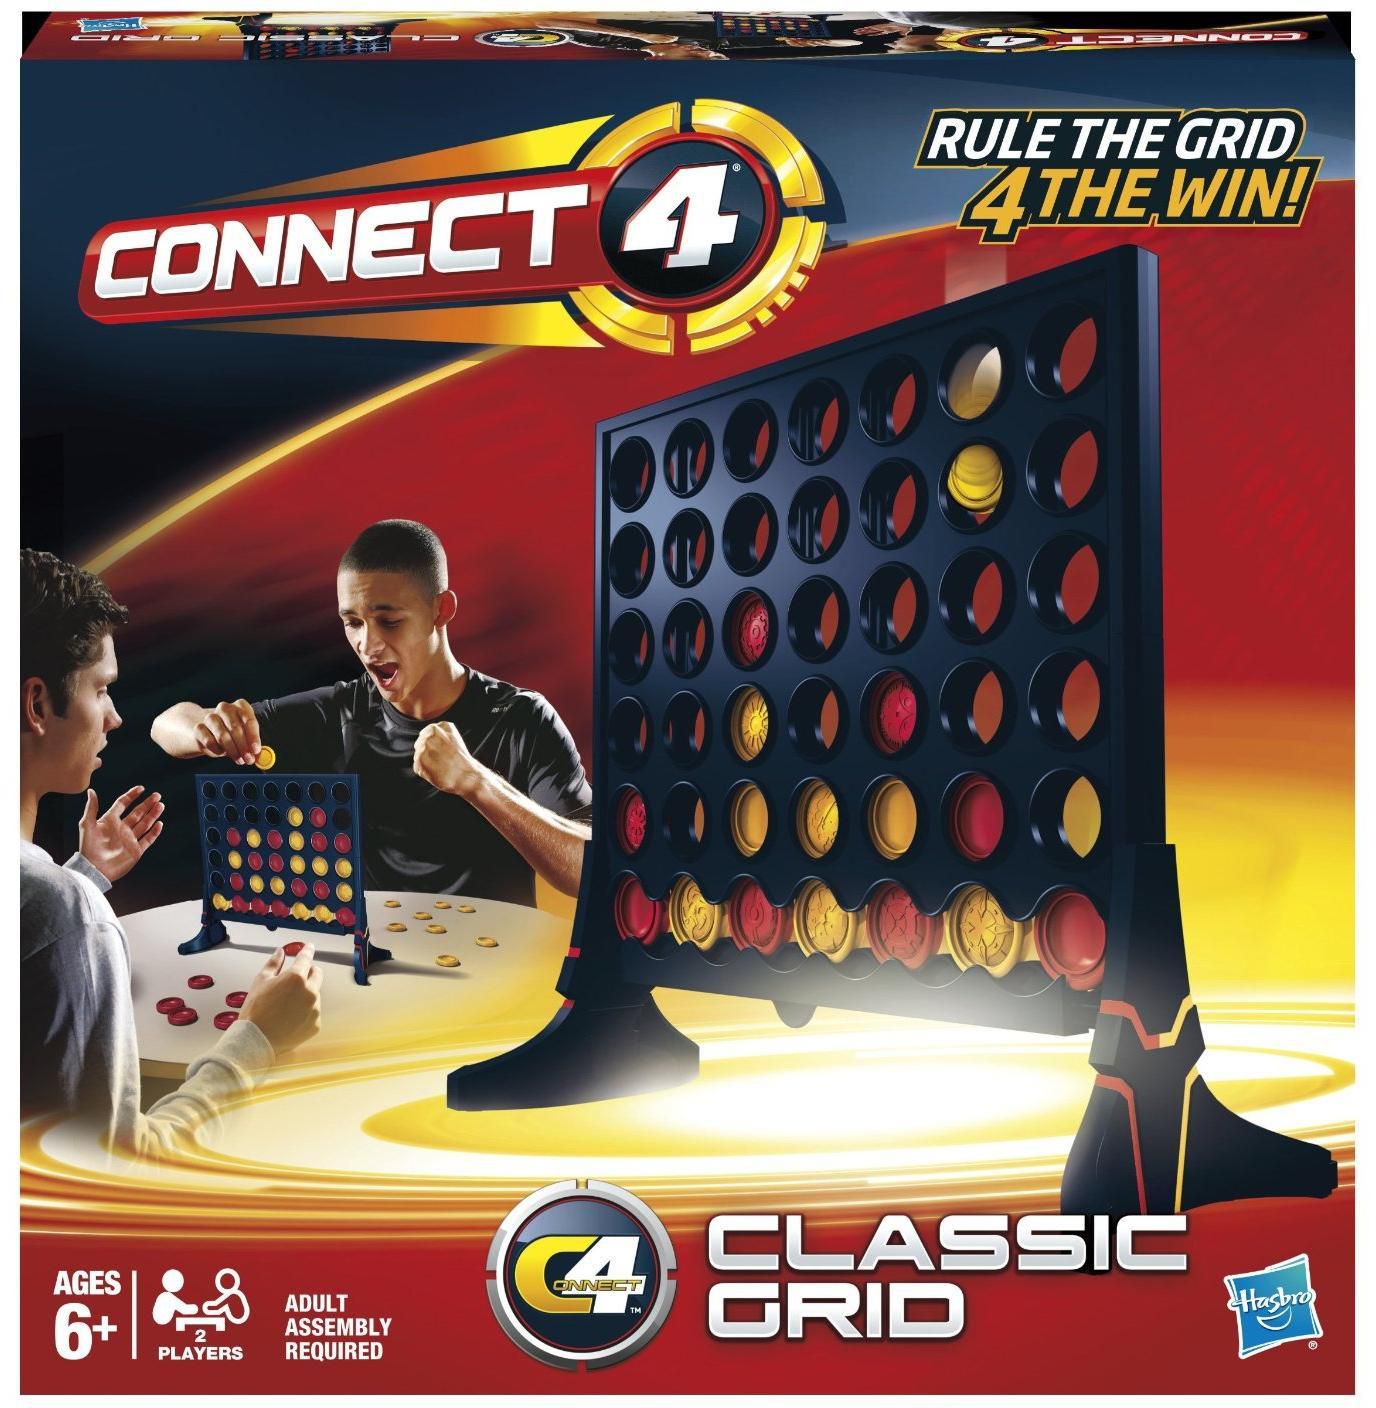 Hasbro Connect Classic Grid - Four in a Row Skill Ability Game